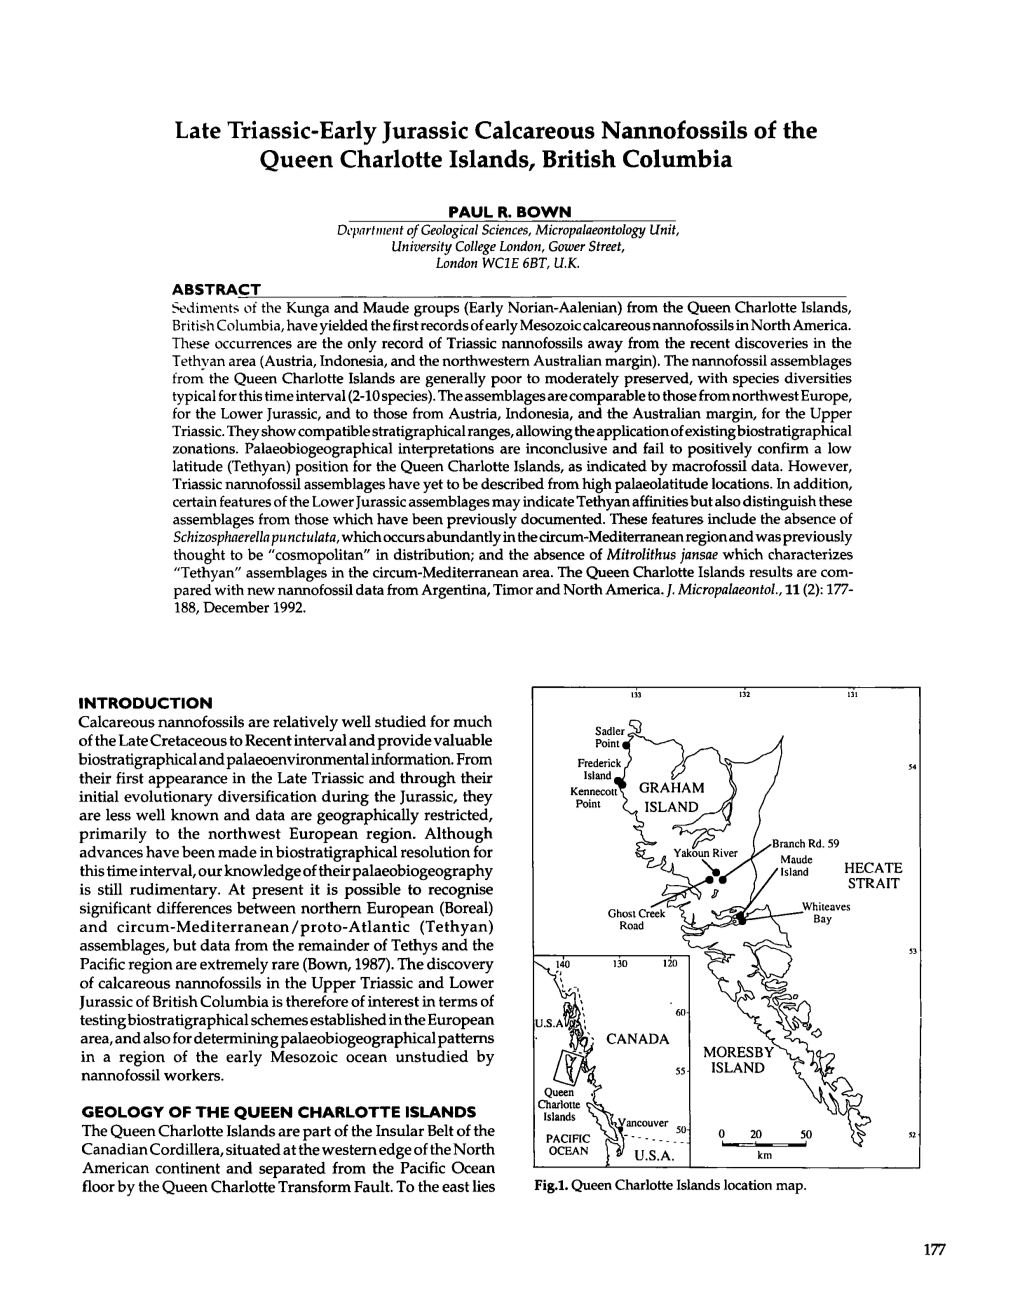 Late Triassic-Early Jurassic Calcareous Nannofossils of the Queen Charlotte Islands, British Columbia